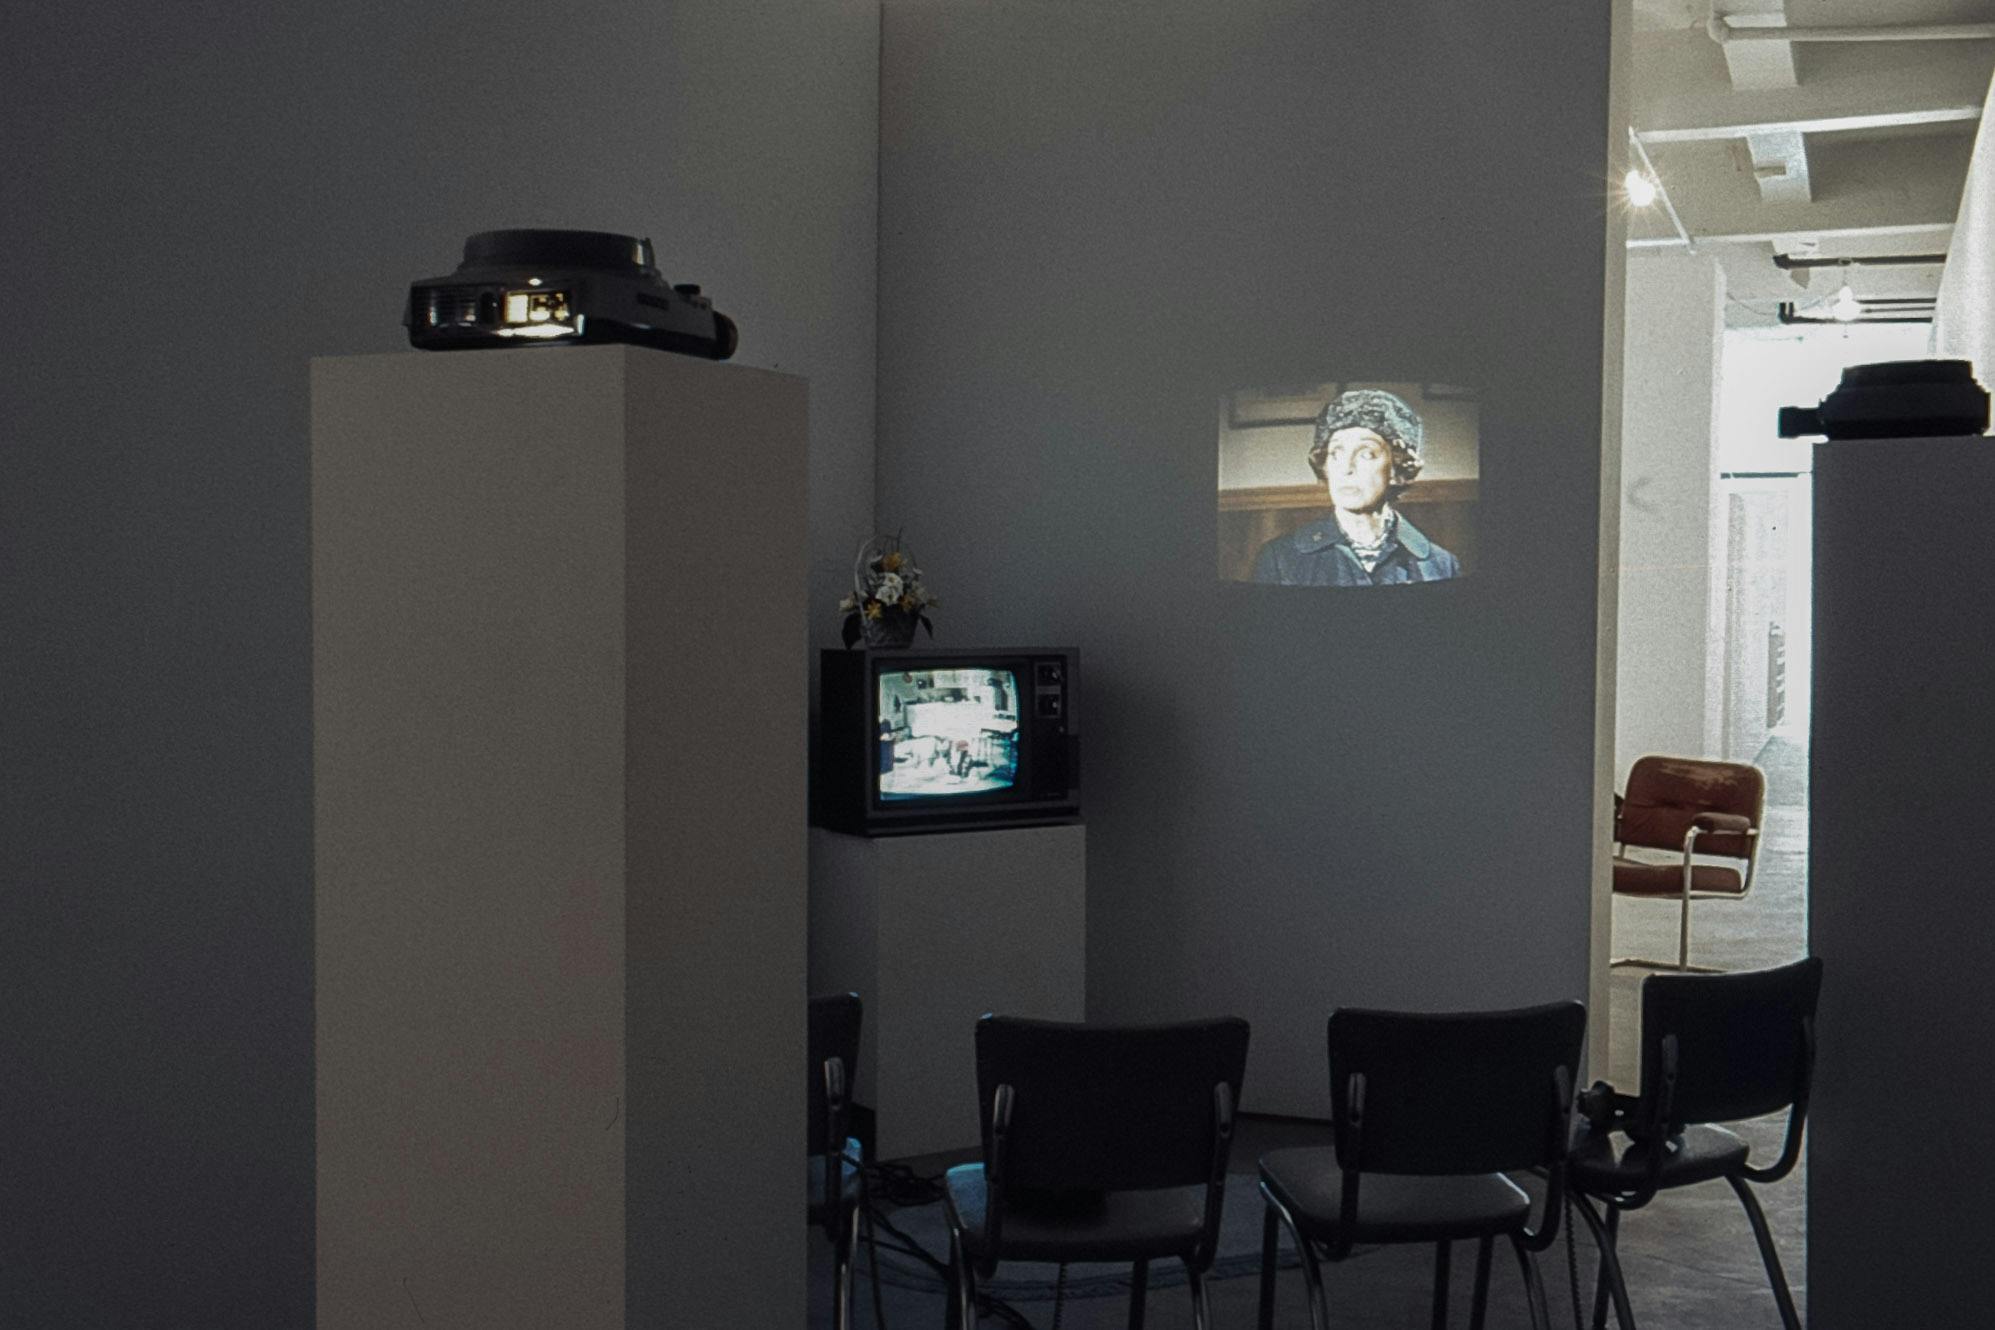 In the dark corner of a gallery space, there are two projectos and a small TV on plinths. Each of the devices plays a different video. Four chairs sit between the plinths, facing the projections.